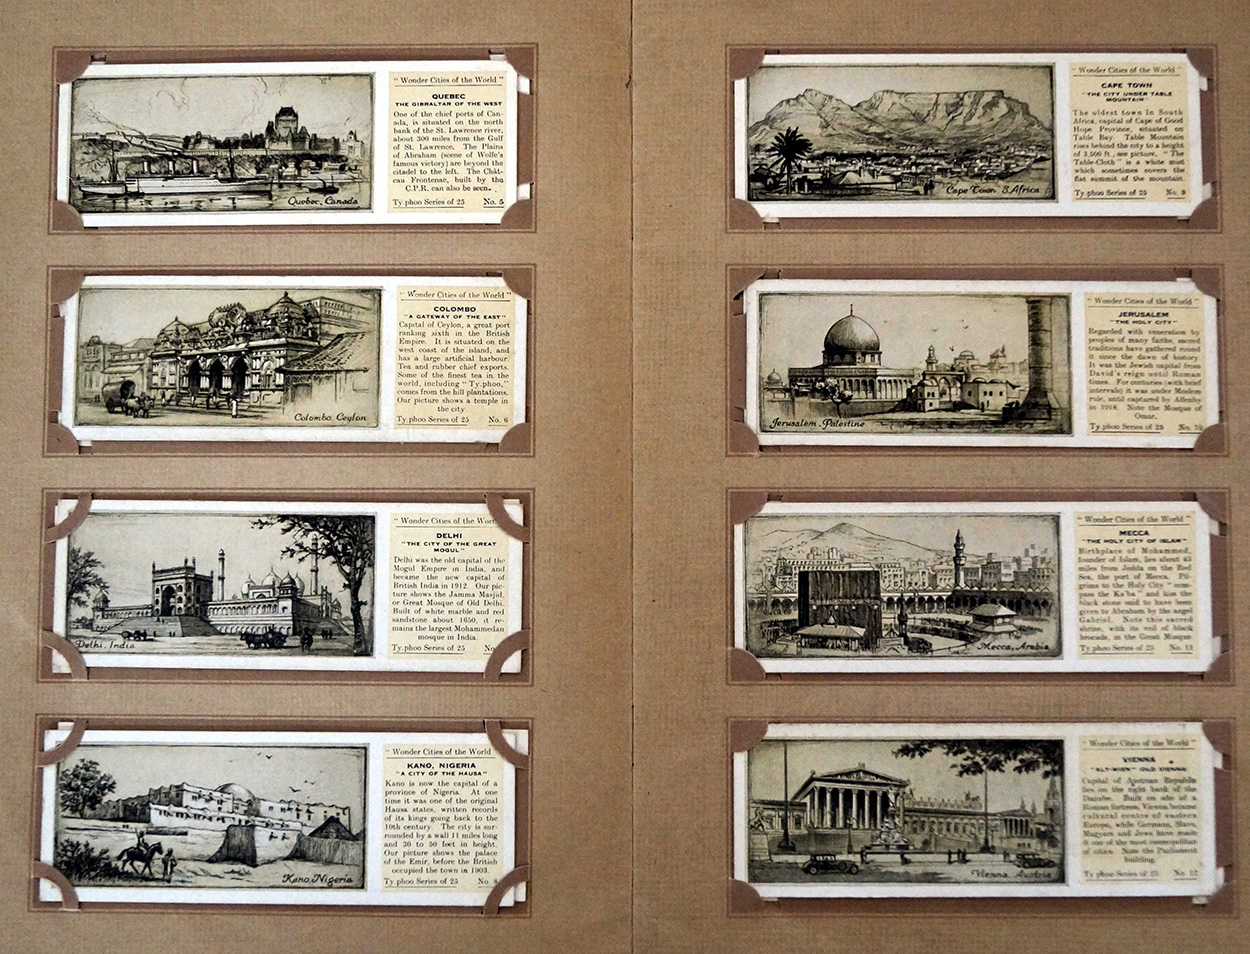 Wonder Cities of the World  Full set of 25 card in album (1933) art by British History at The Illustration Art Gallery